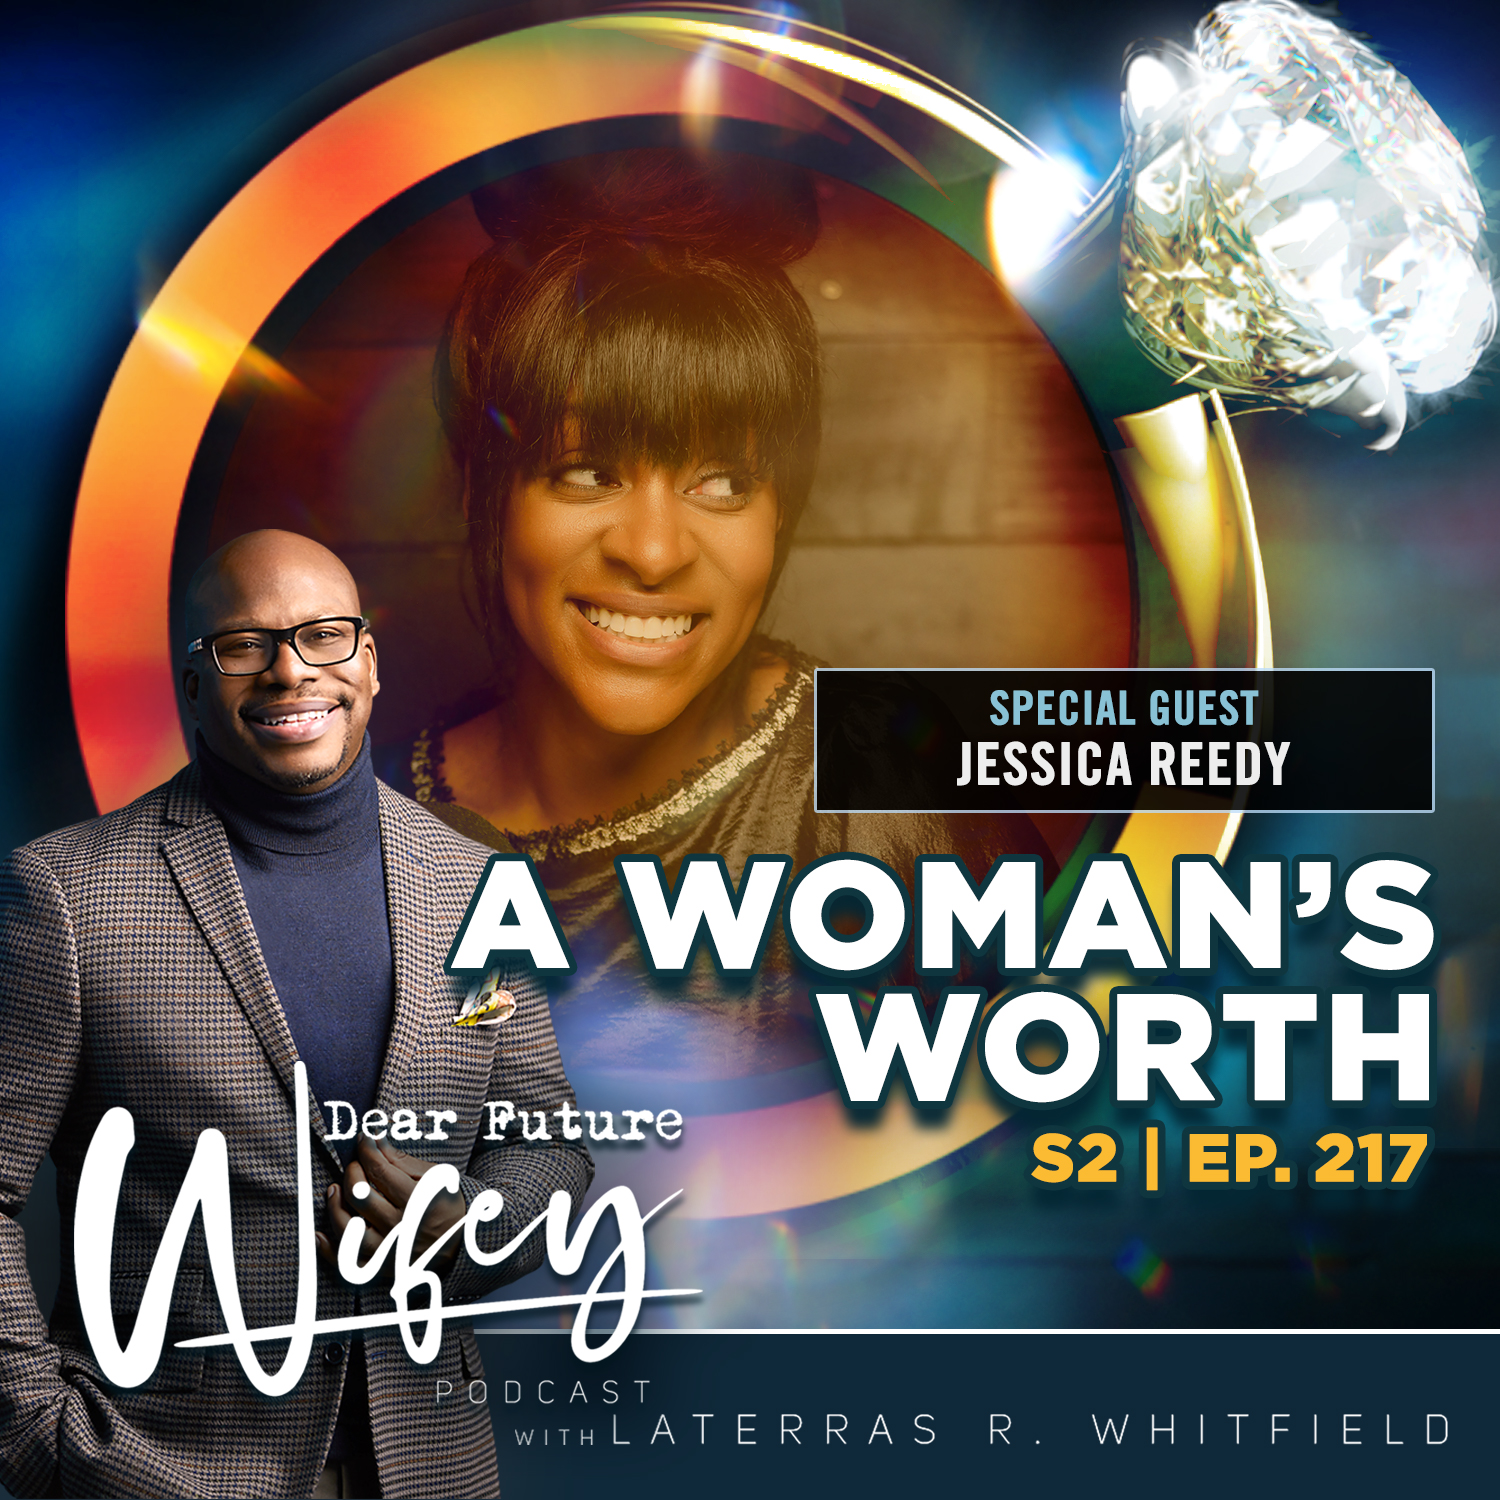 A Woman's Worth (Guest: Jessica Reedy)